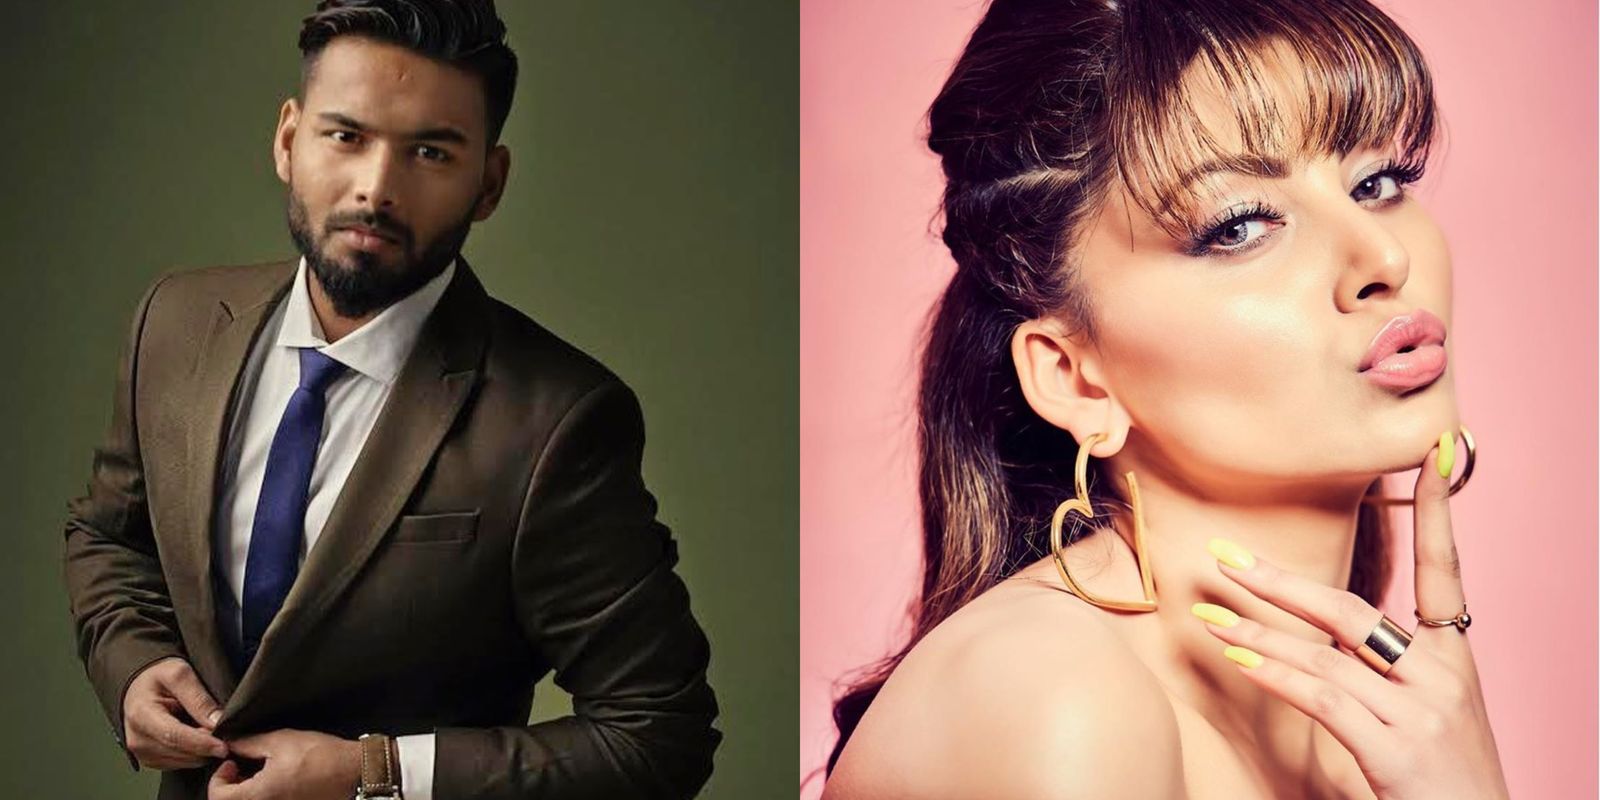 Cricketer Rishabh Pant Went For A Late Night Date With Urvashi Rautela, Before The T20 Match Between India And West Indies